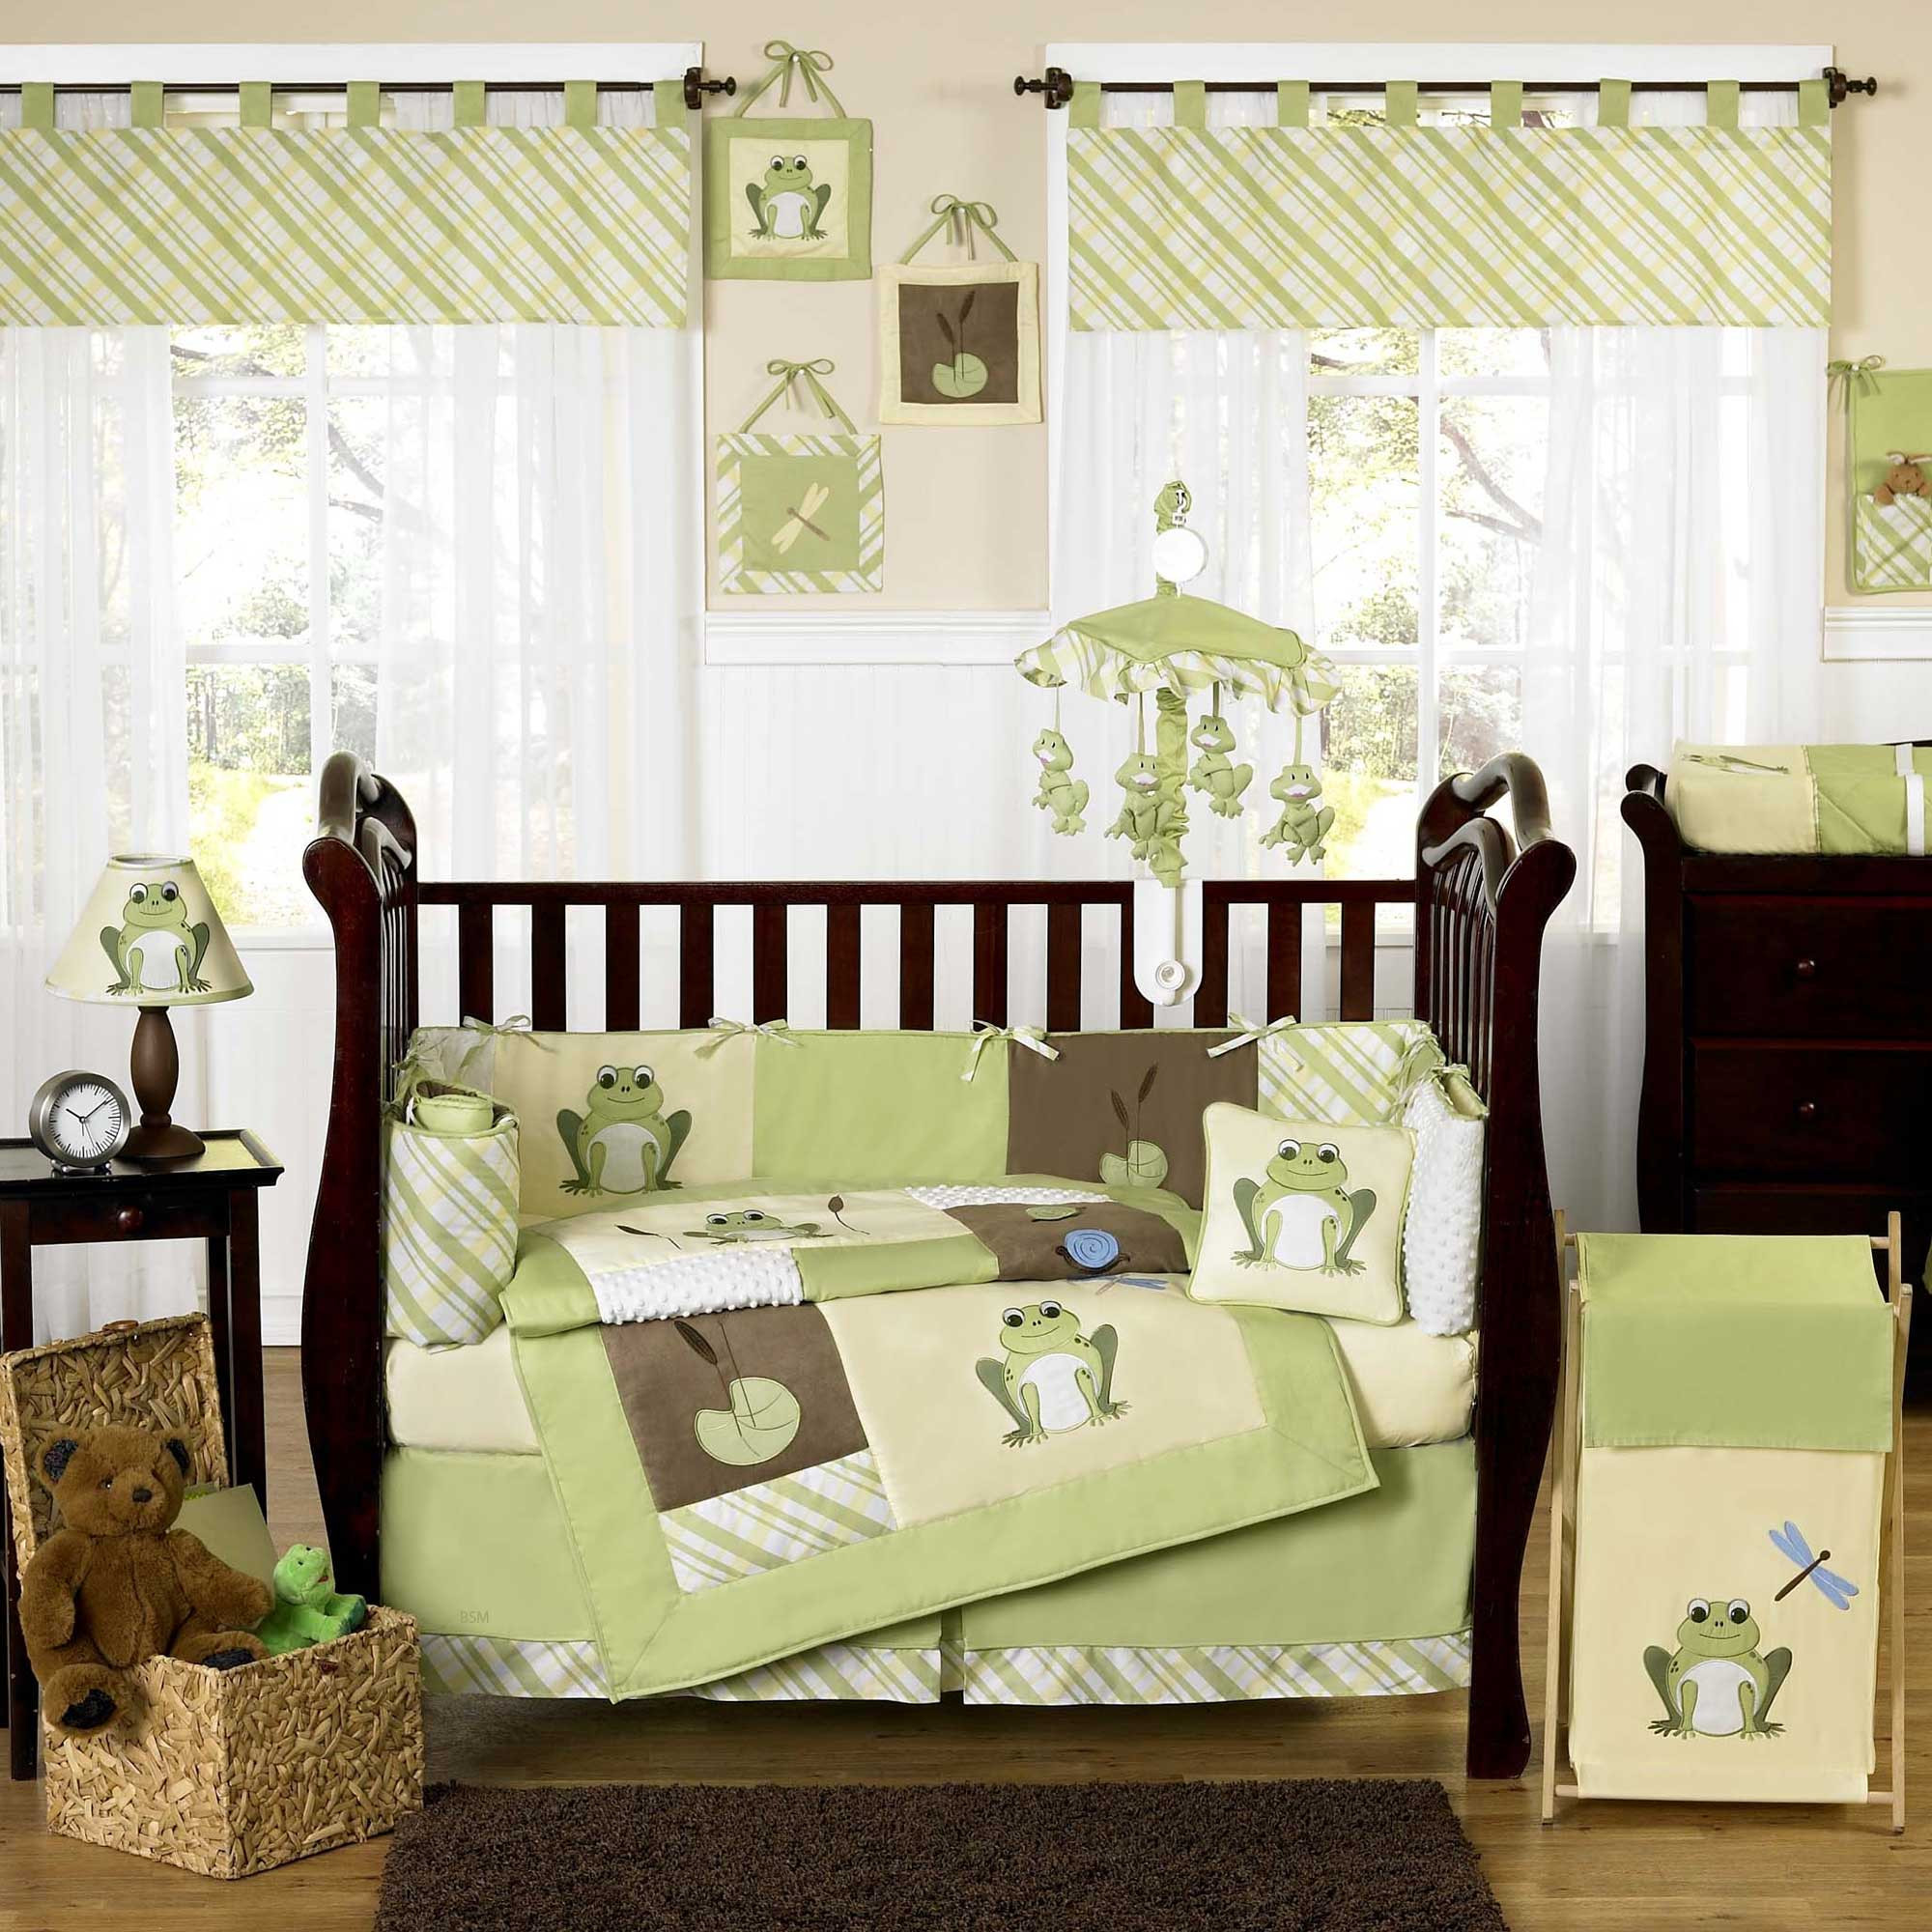 Baby Boy Room Decorations
 Themes For Baby Rooms Ideas – HomesFeed